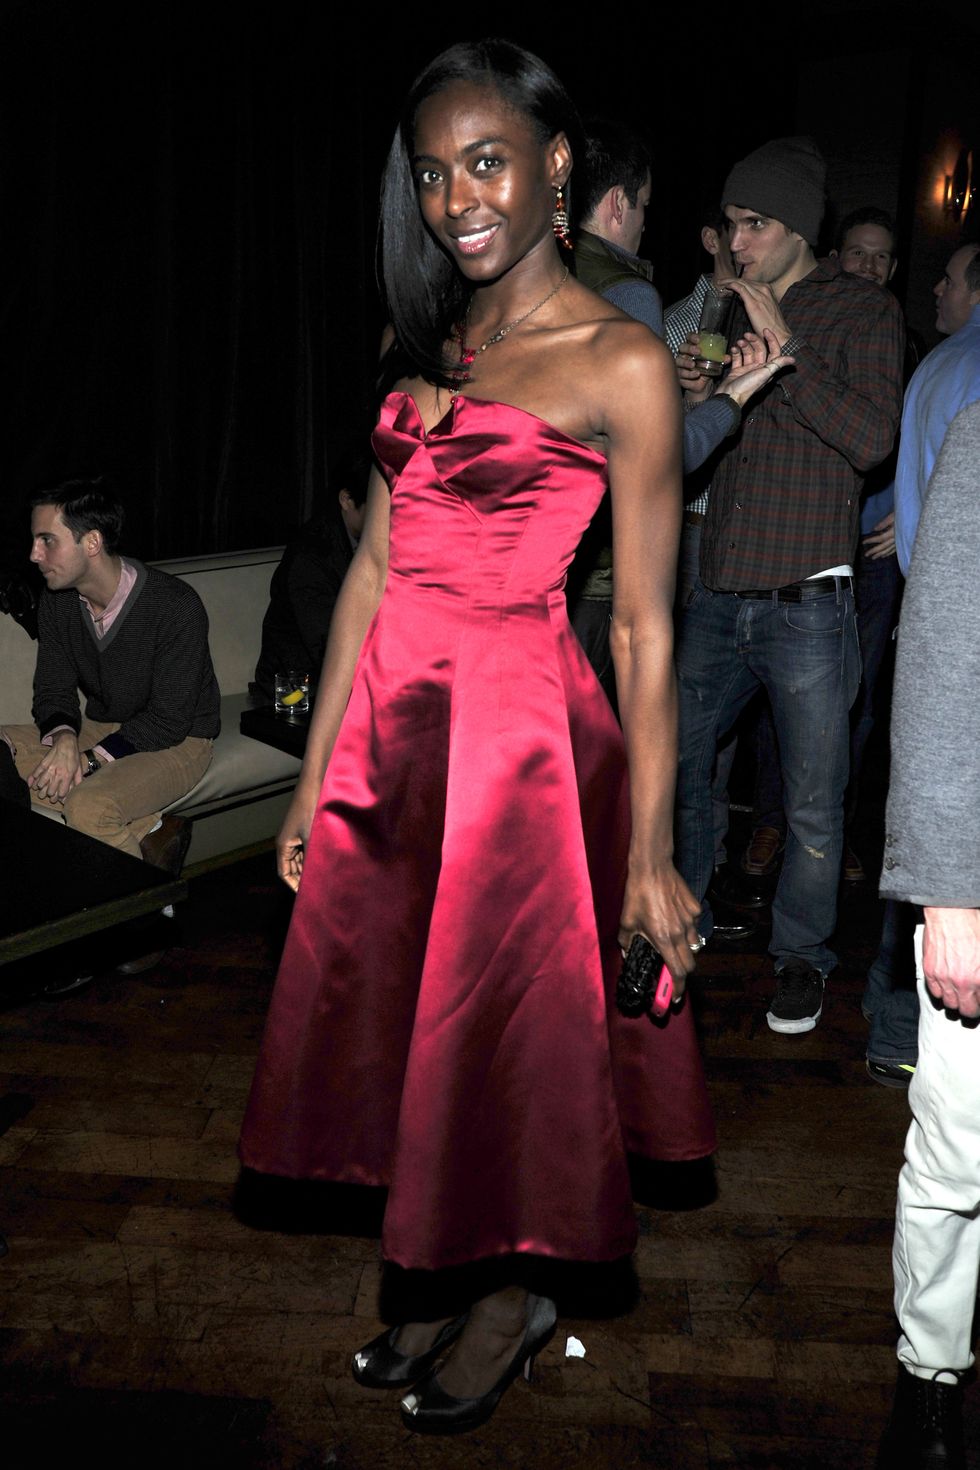 new york city, ny   february 4 princess keisha omilana attends feed the homeless a fundraiser for the coalition of the homeless at tribeca grand hotel on february 4, 2010 in new york city photo by patrick mcmullanpatrick mcmullan via getty images